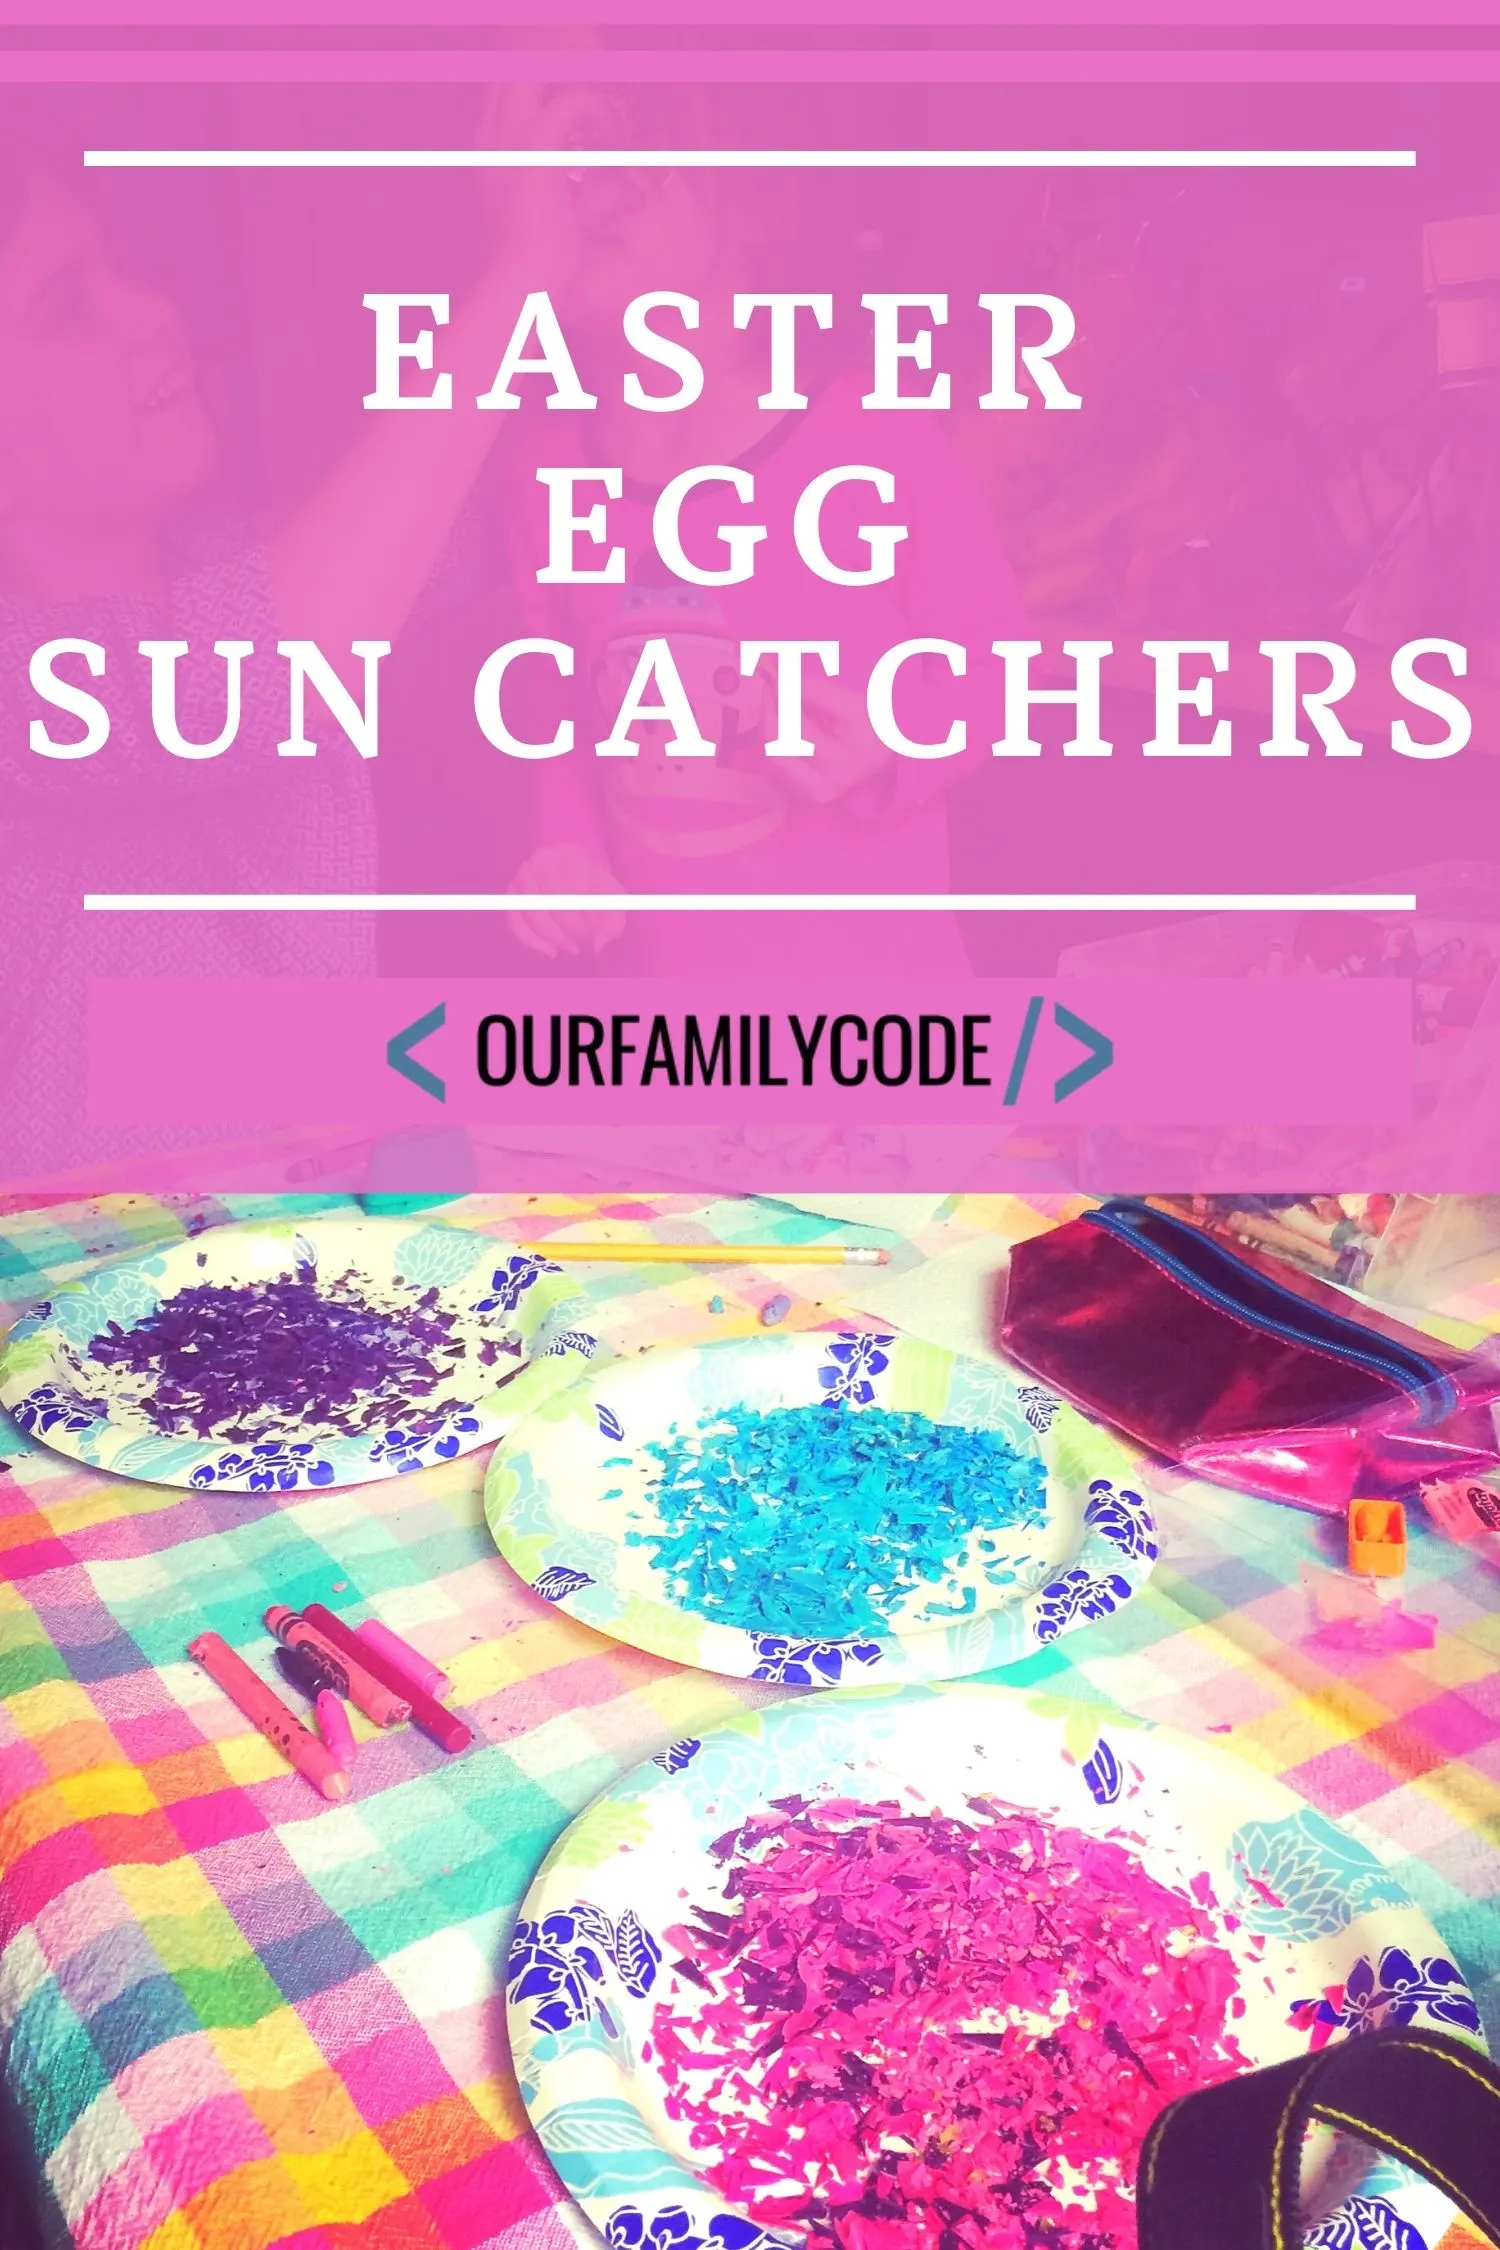 Repurpose Crayons: Make Sun Catchers from Crayon Shavings - Our